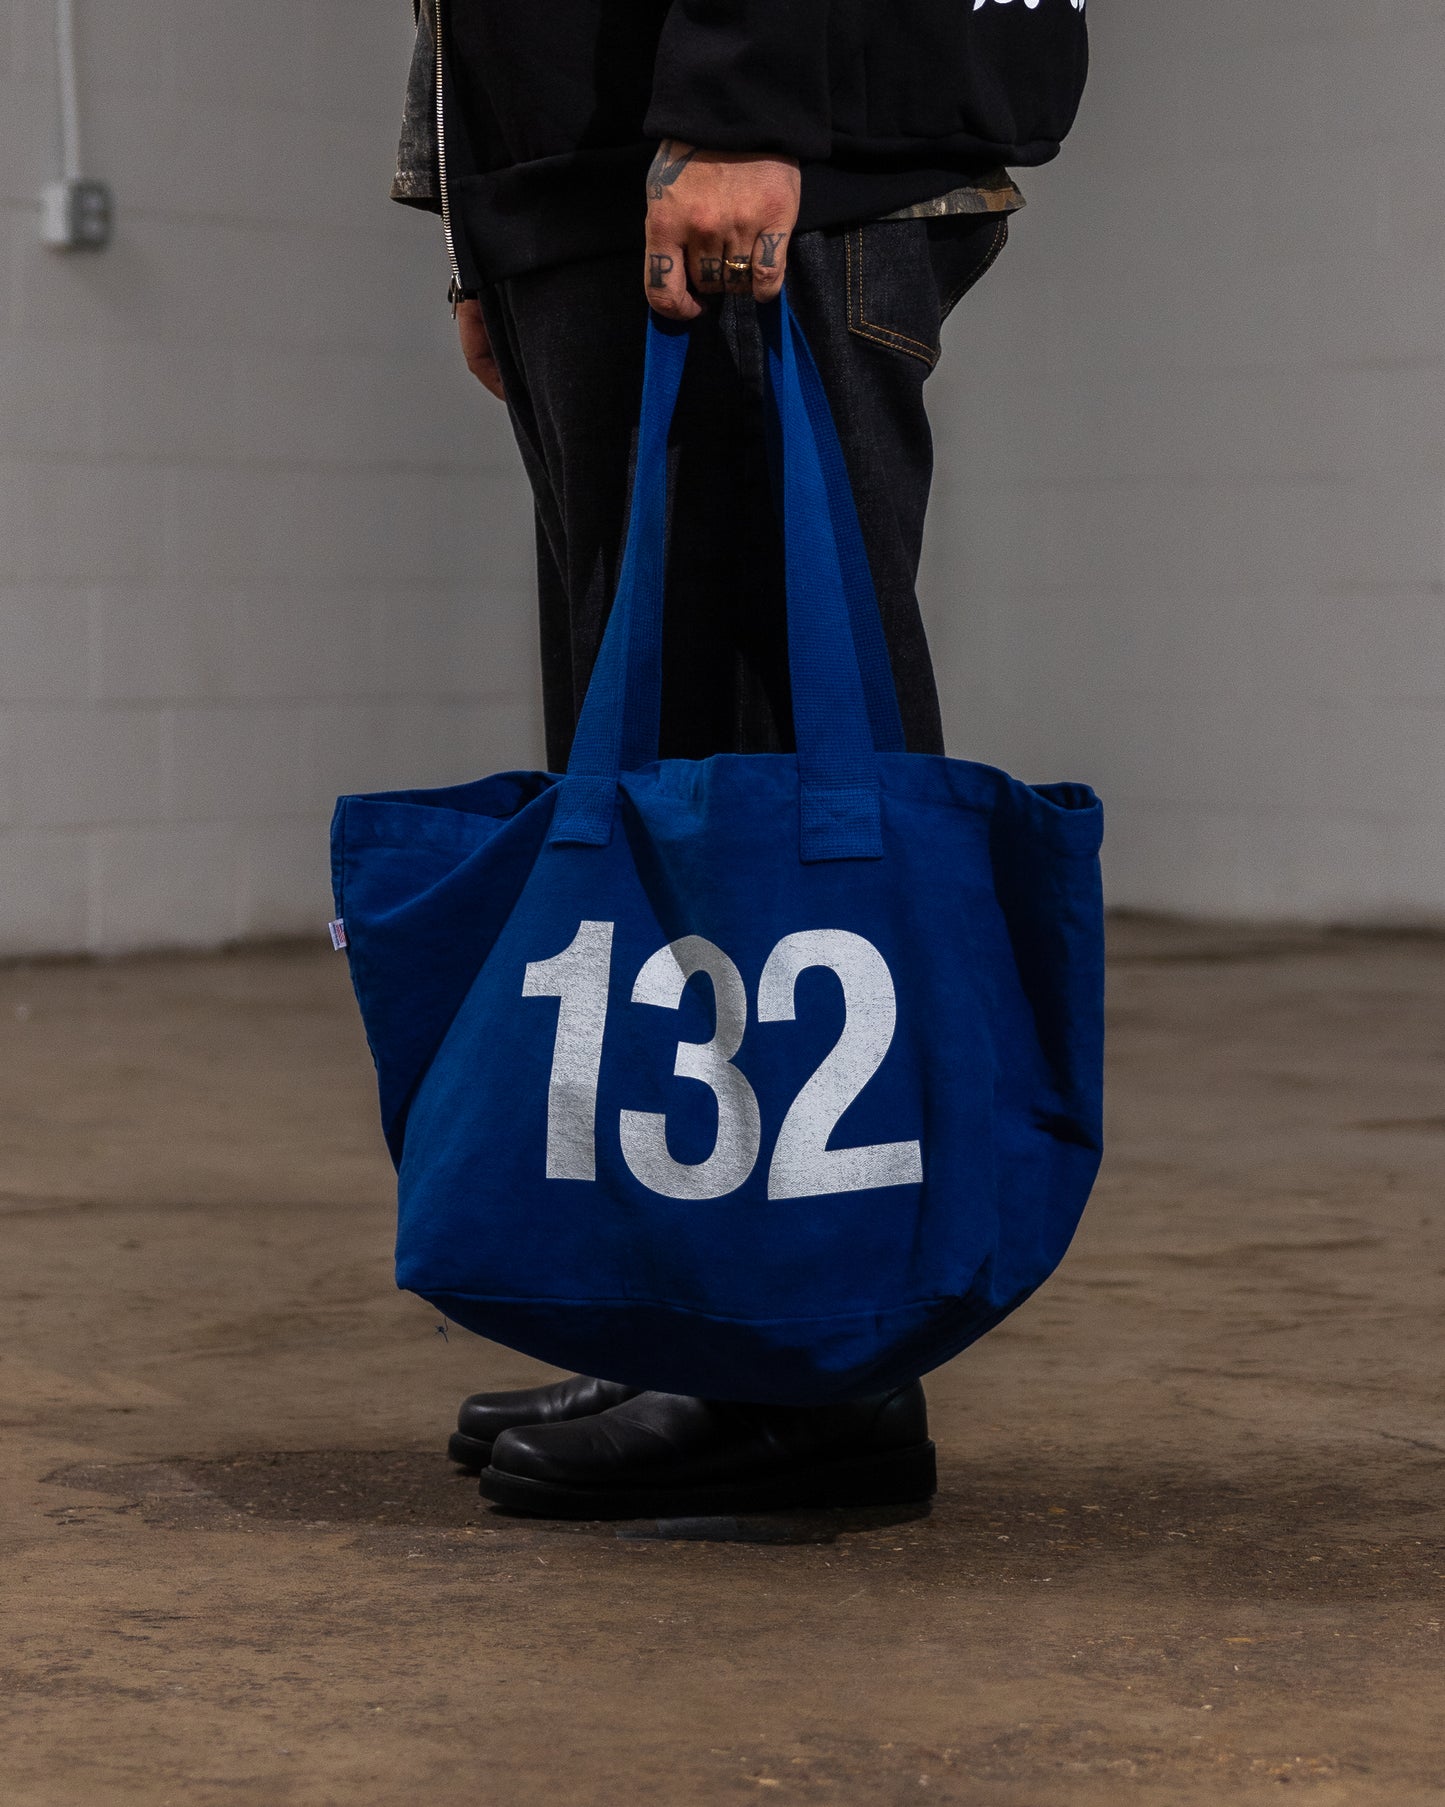 *PS132* TOTE